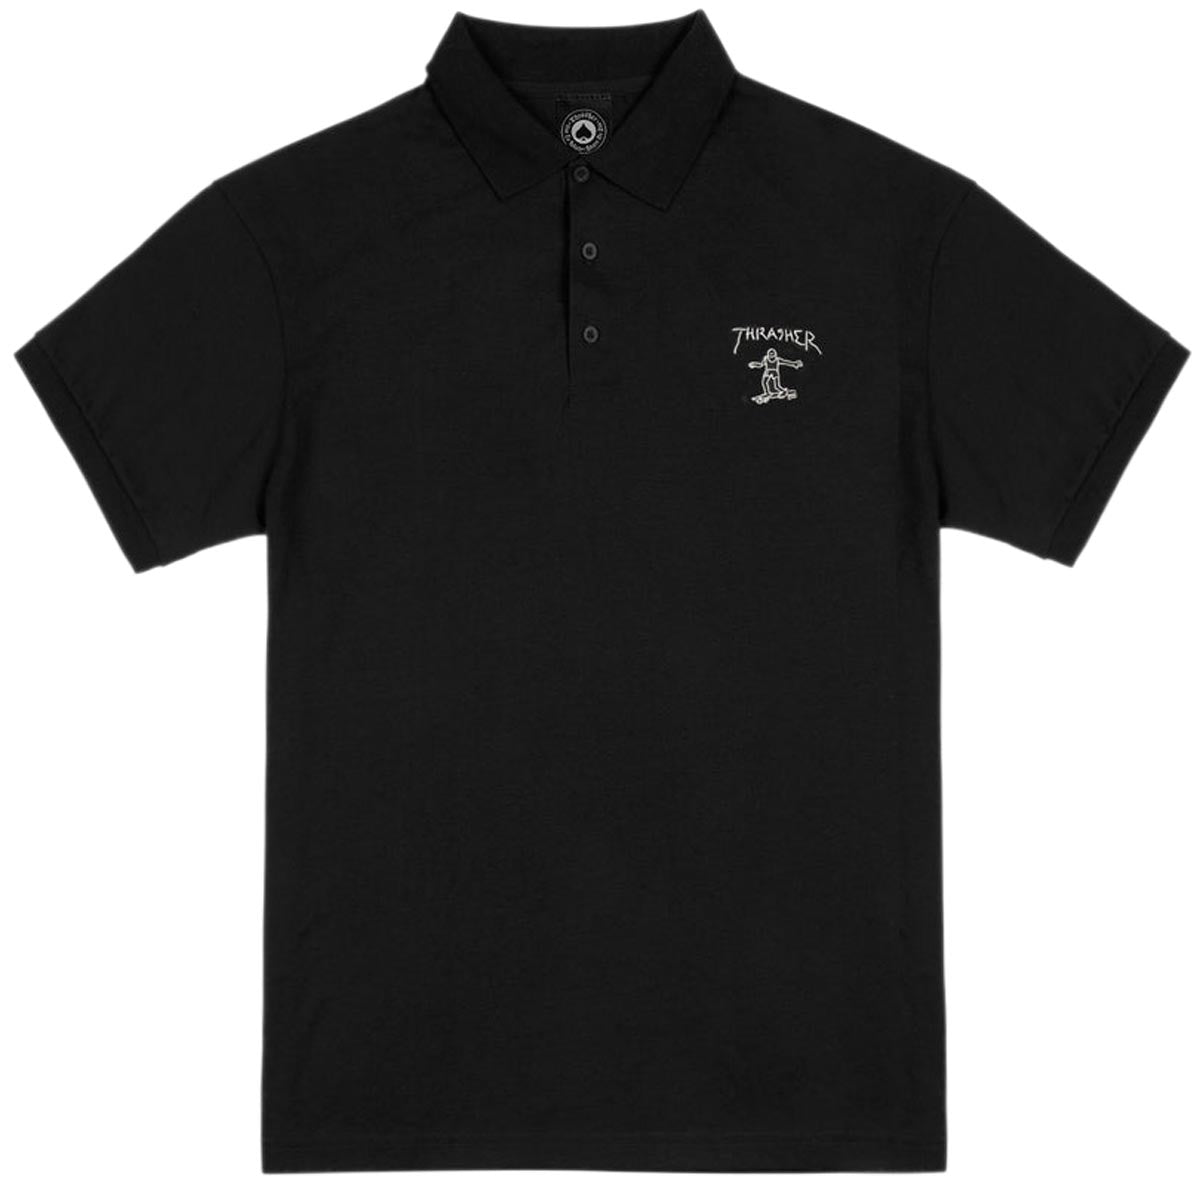 Thrasher Little Gonz Embroidered Polo Shirt - Black image 1